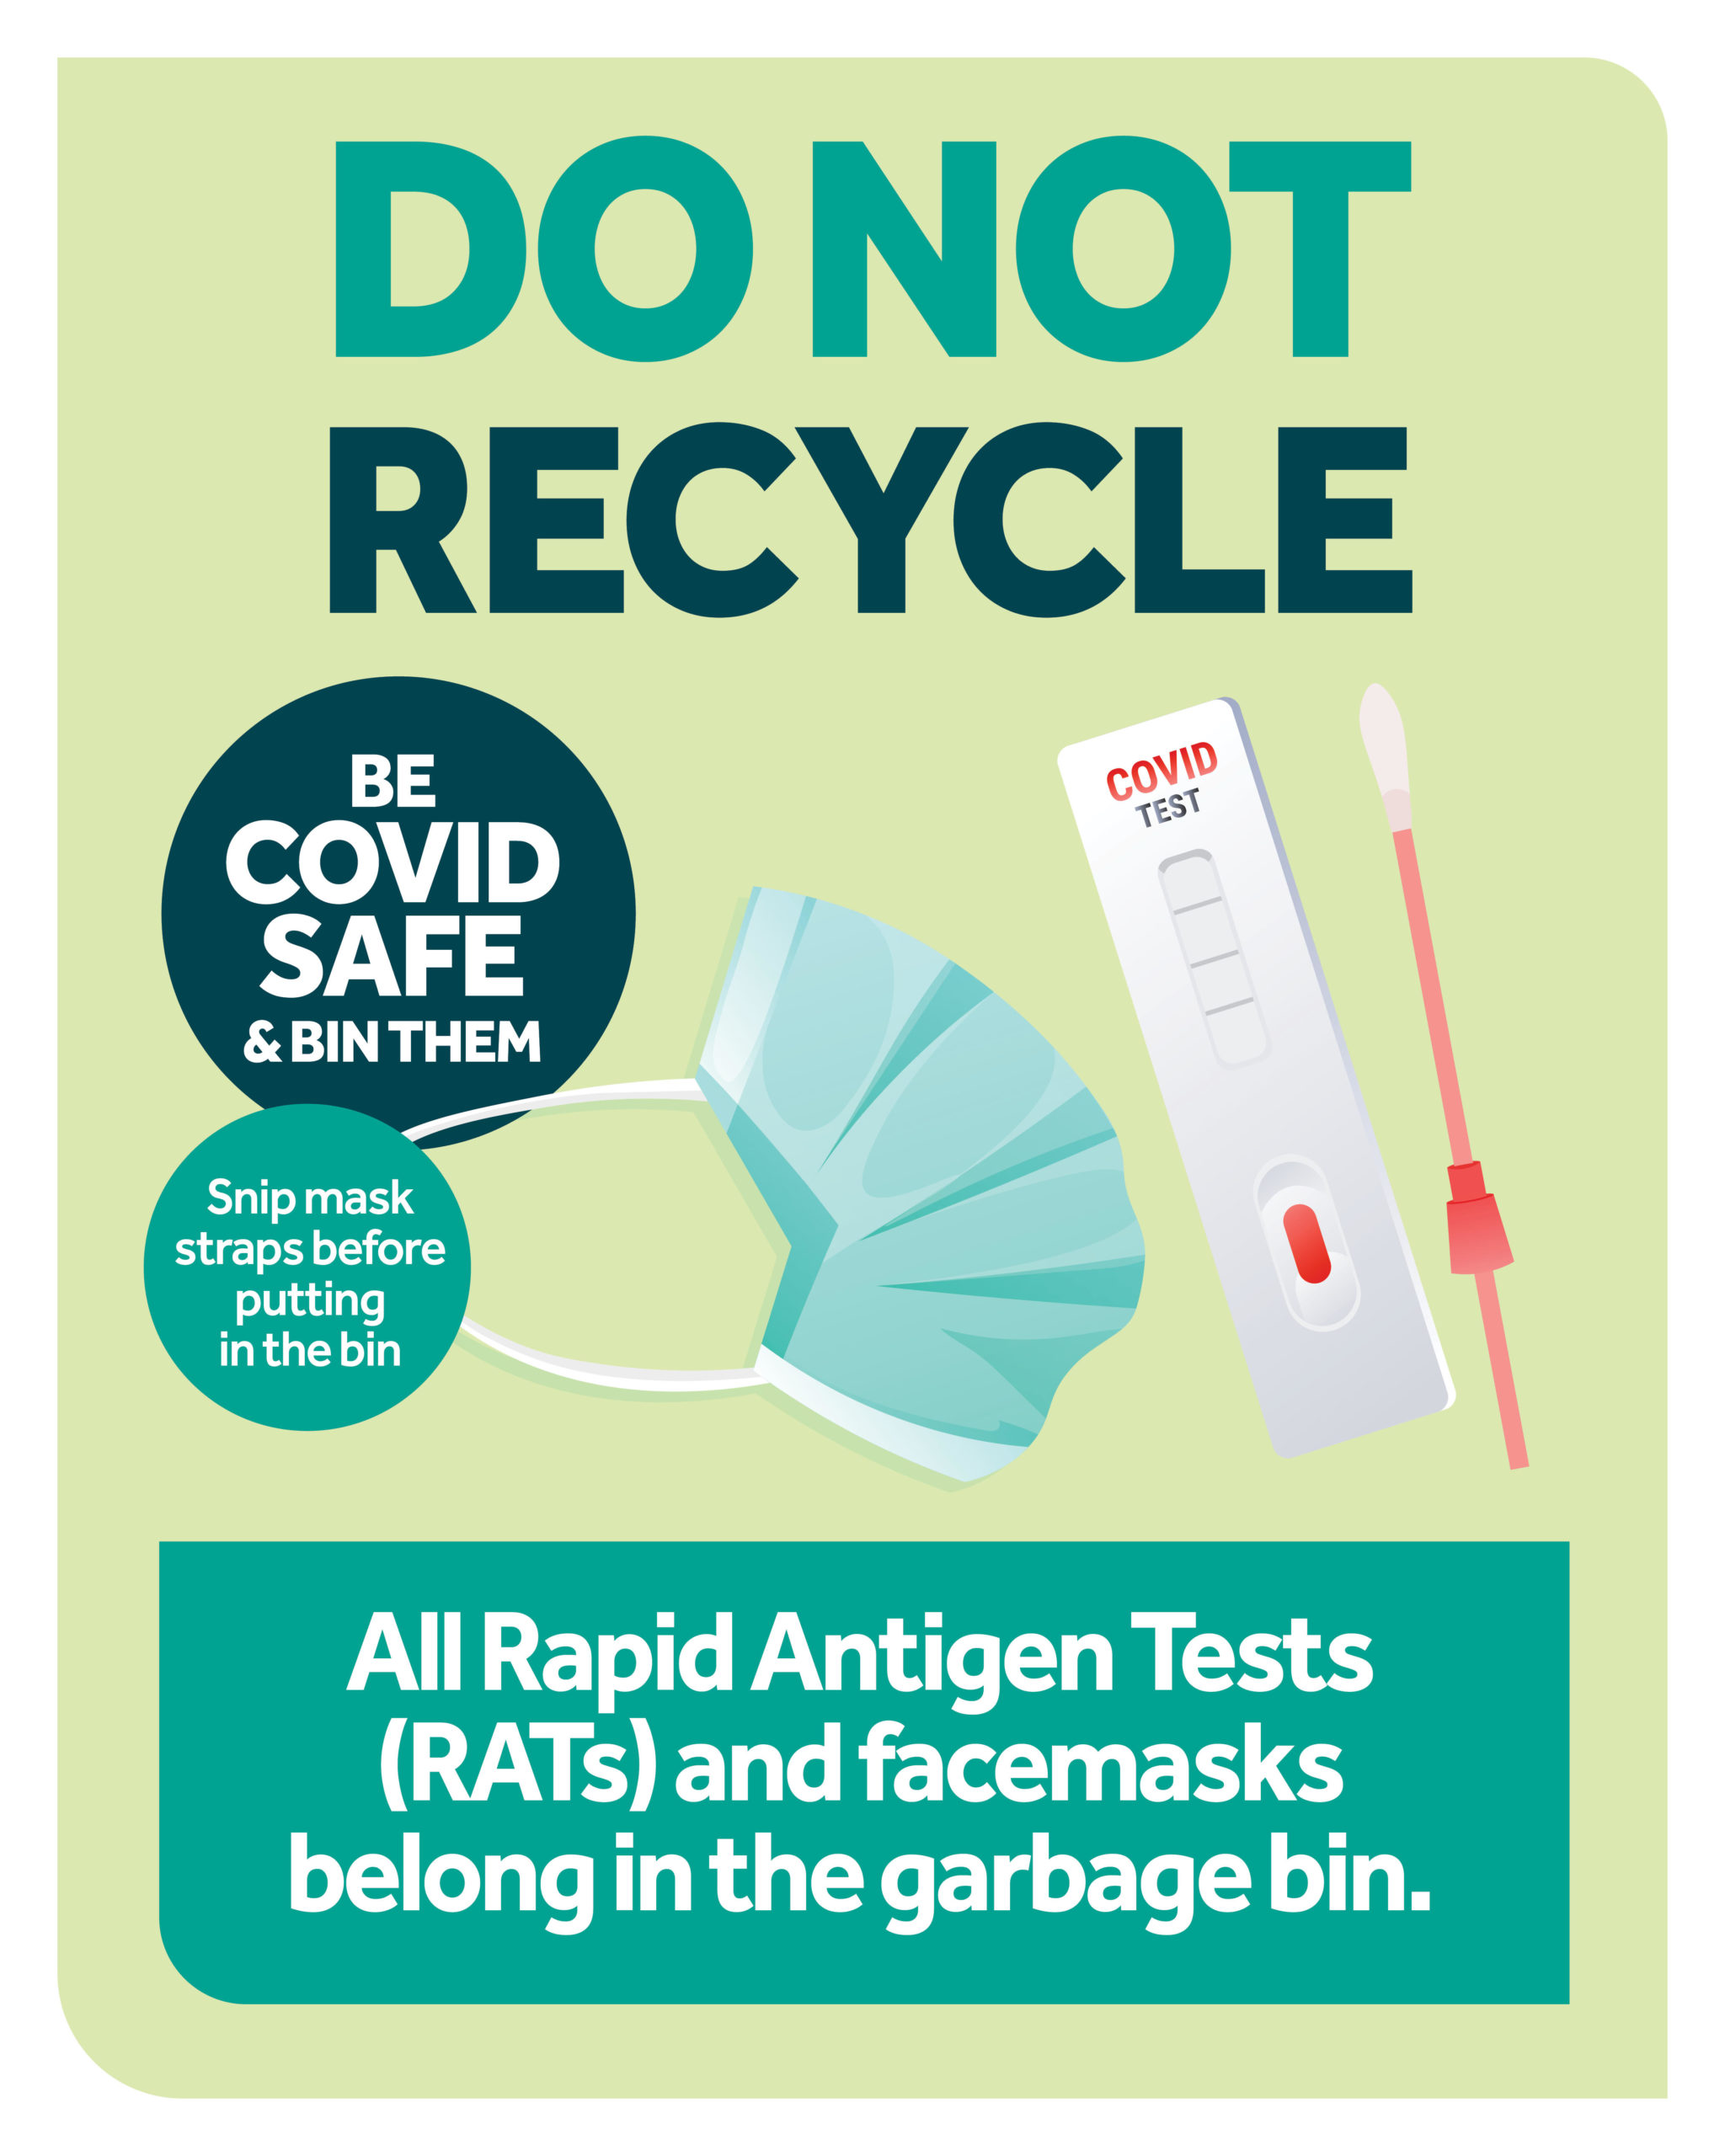 How to dispose of Rapid Antigen Tests and facemasks